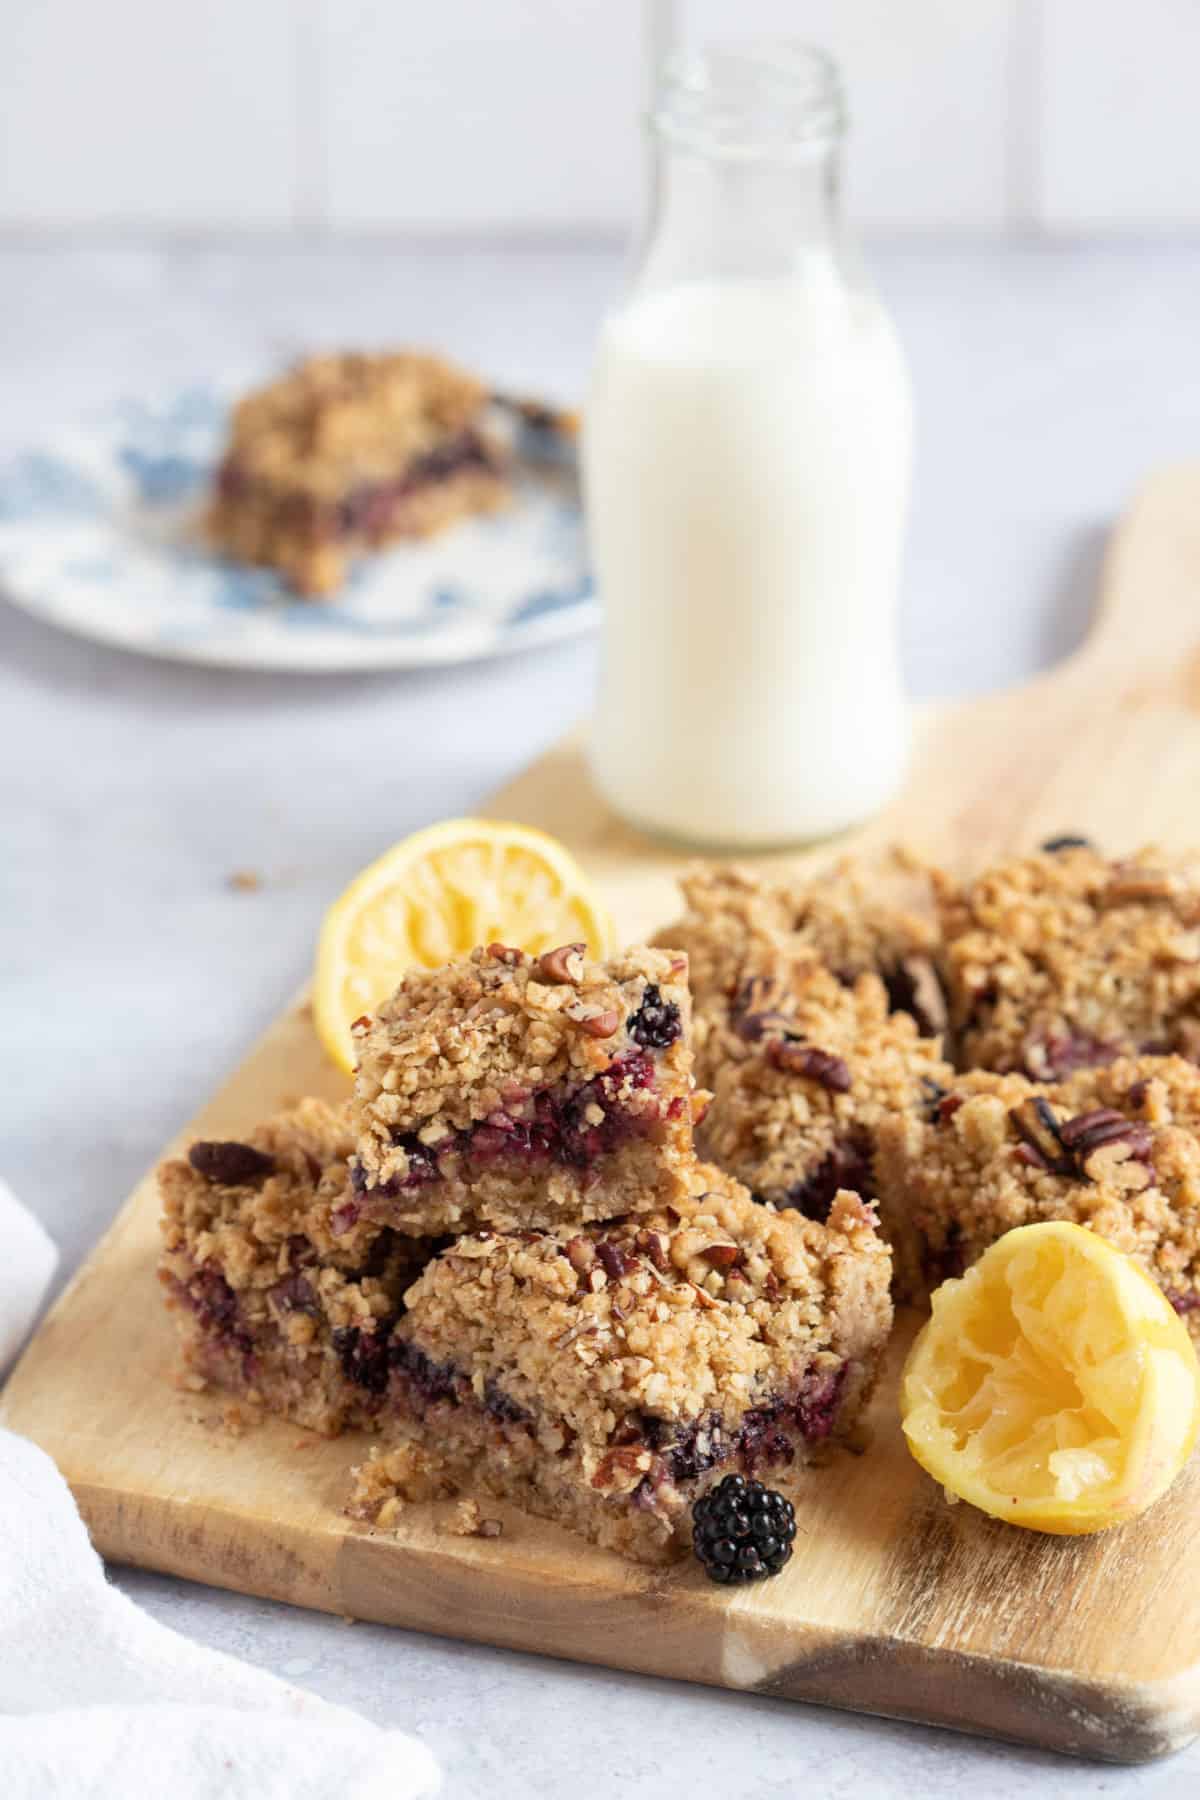 Blackberry crumble bars on a chopping board with a glass of milk.